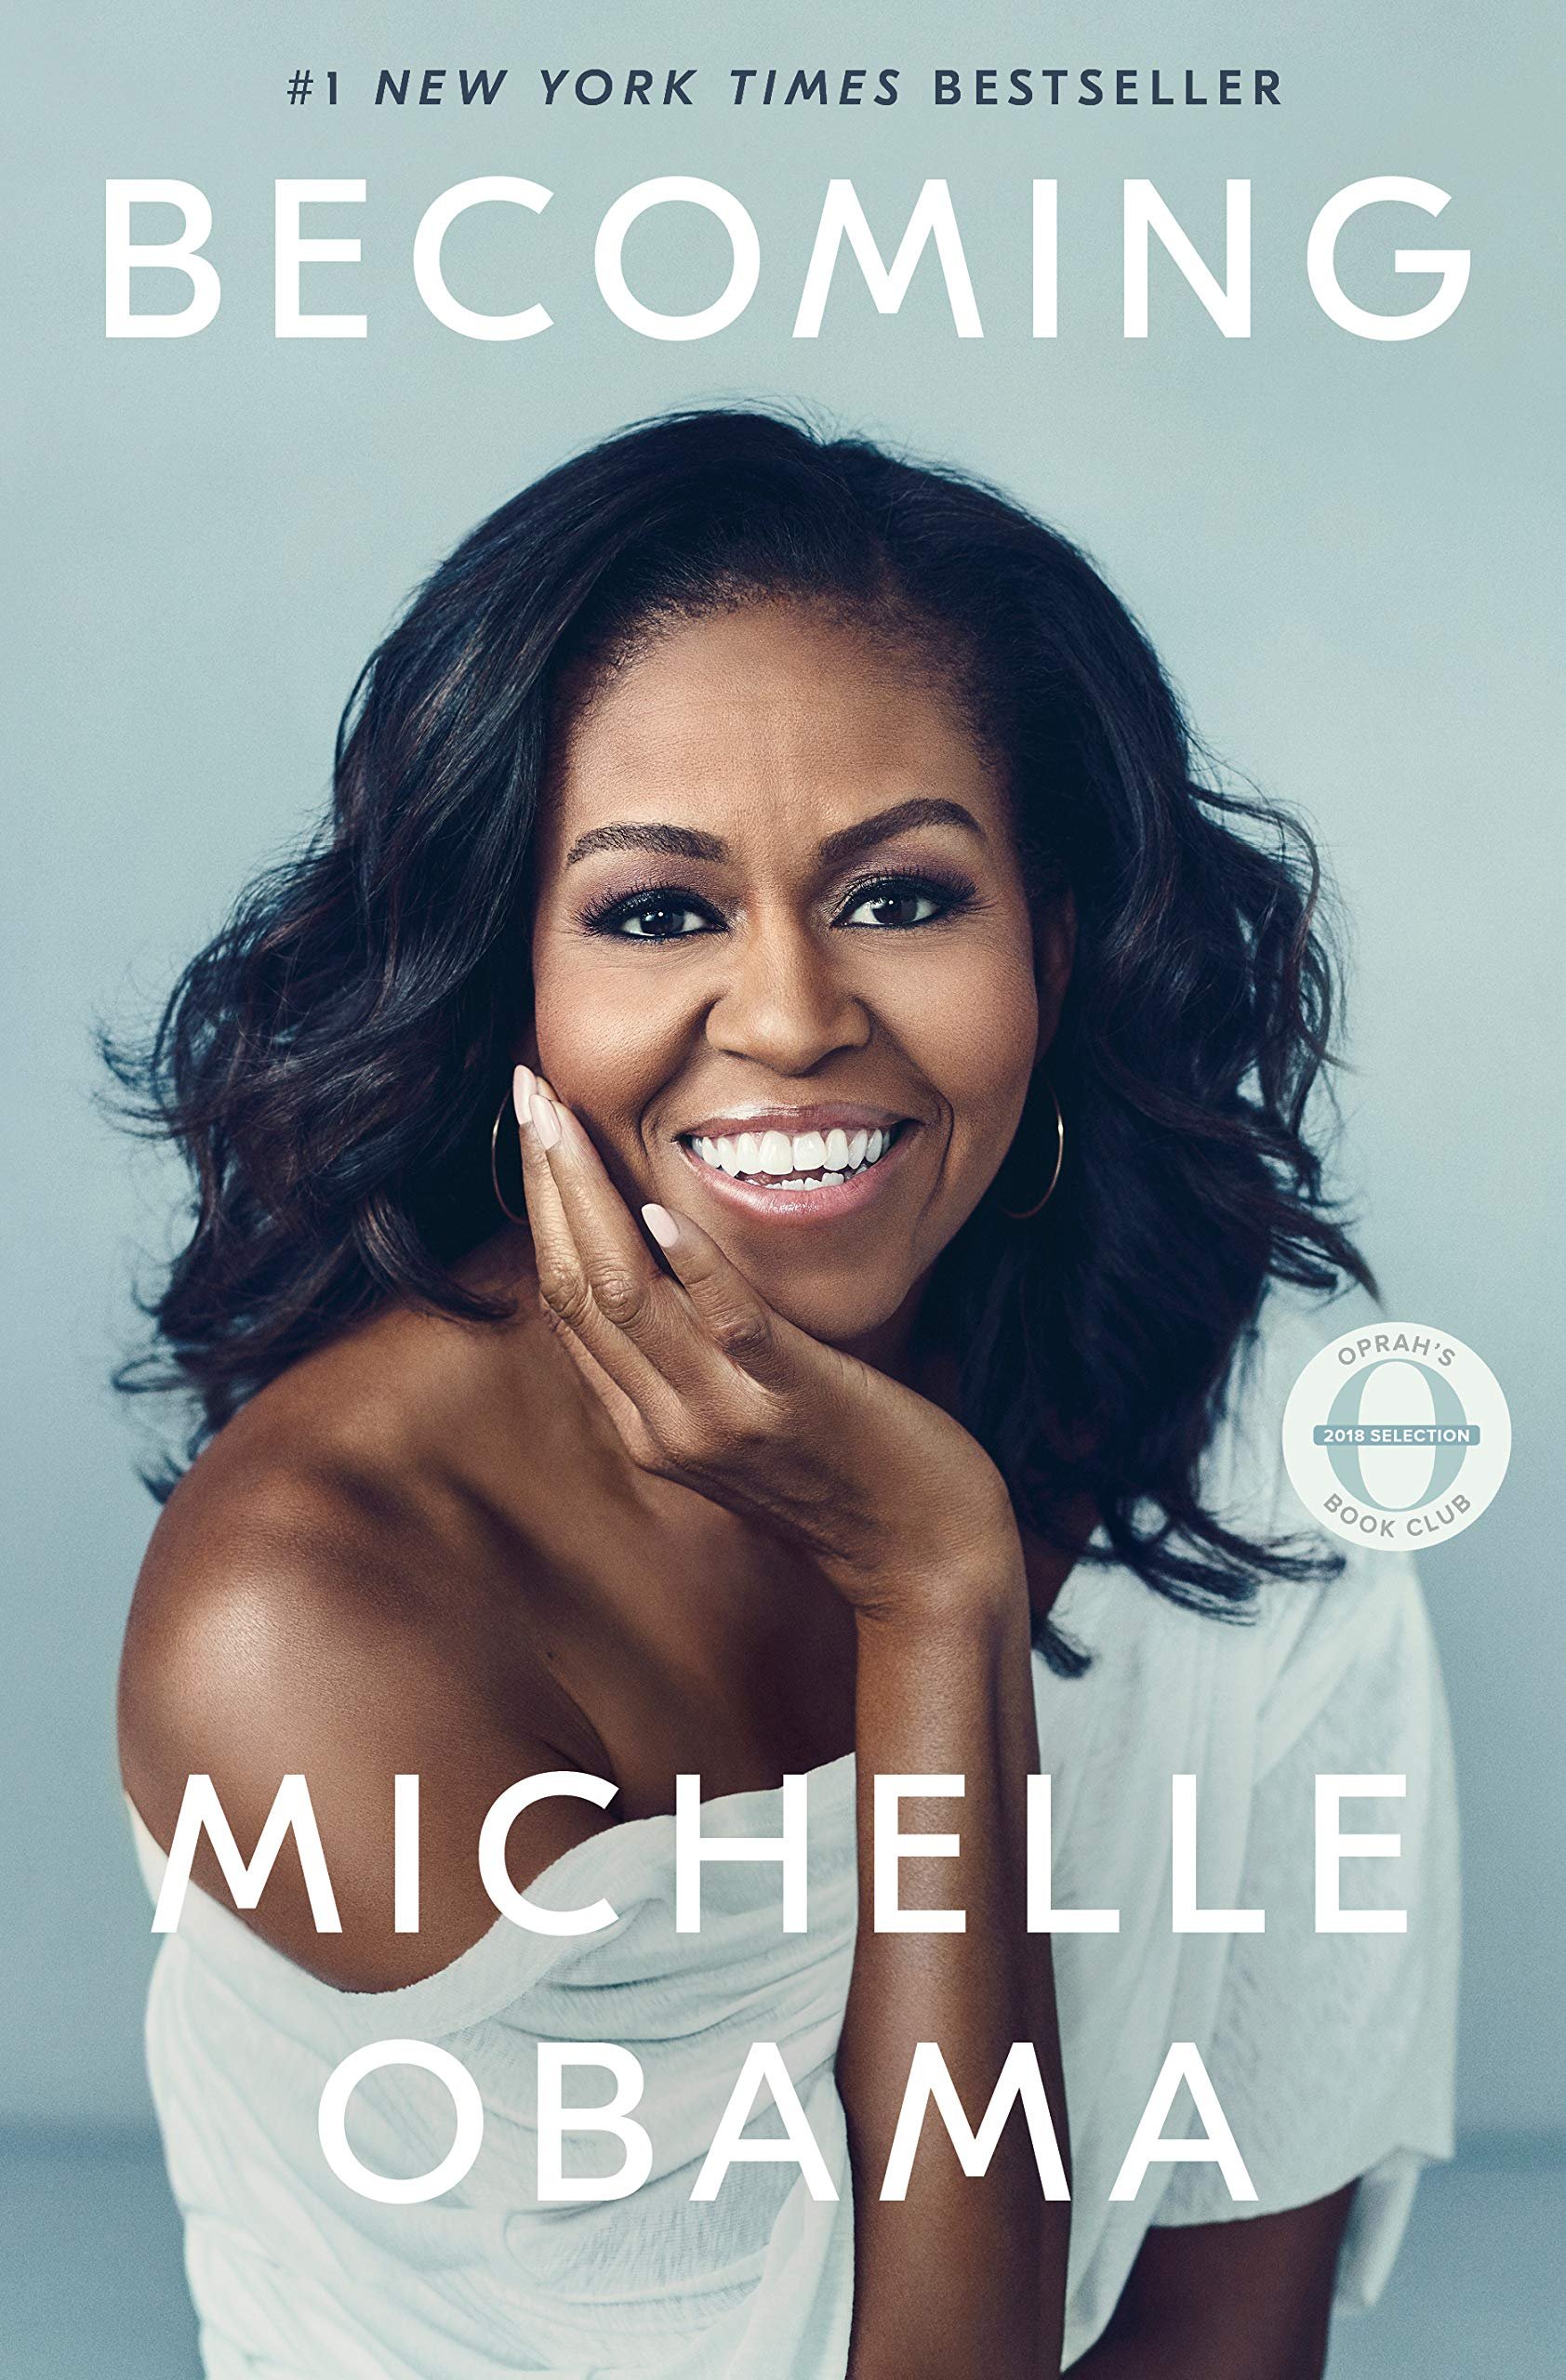 Becoming by Michelle Obama copy.jpg